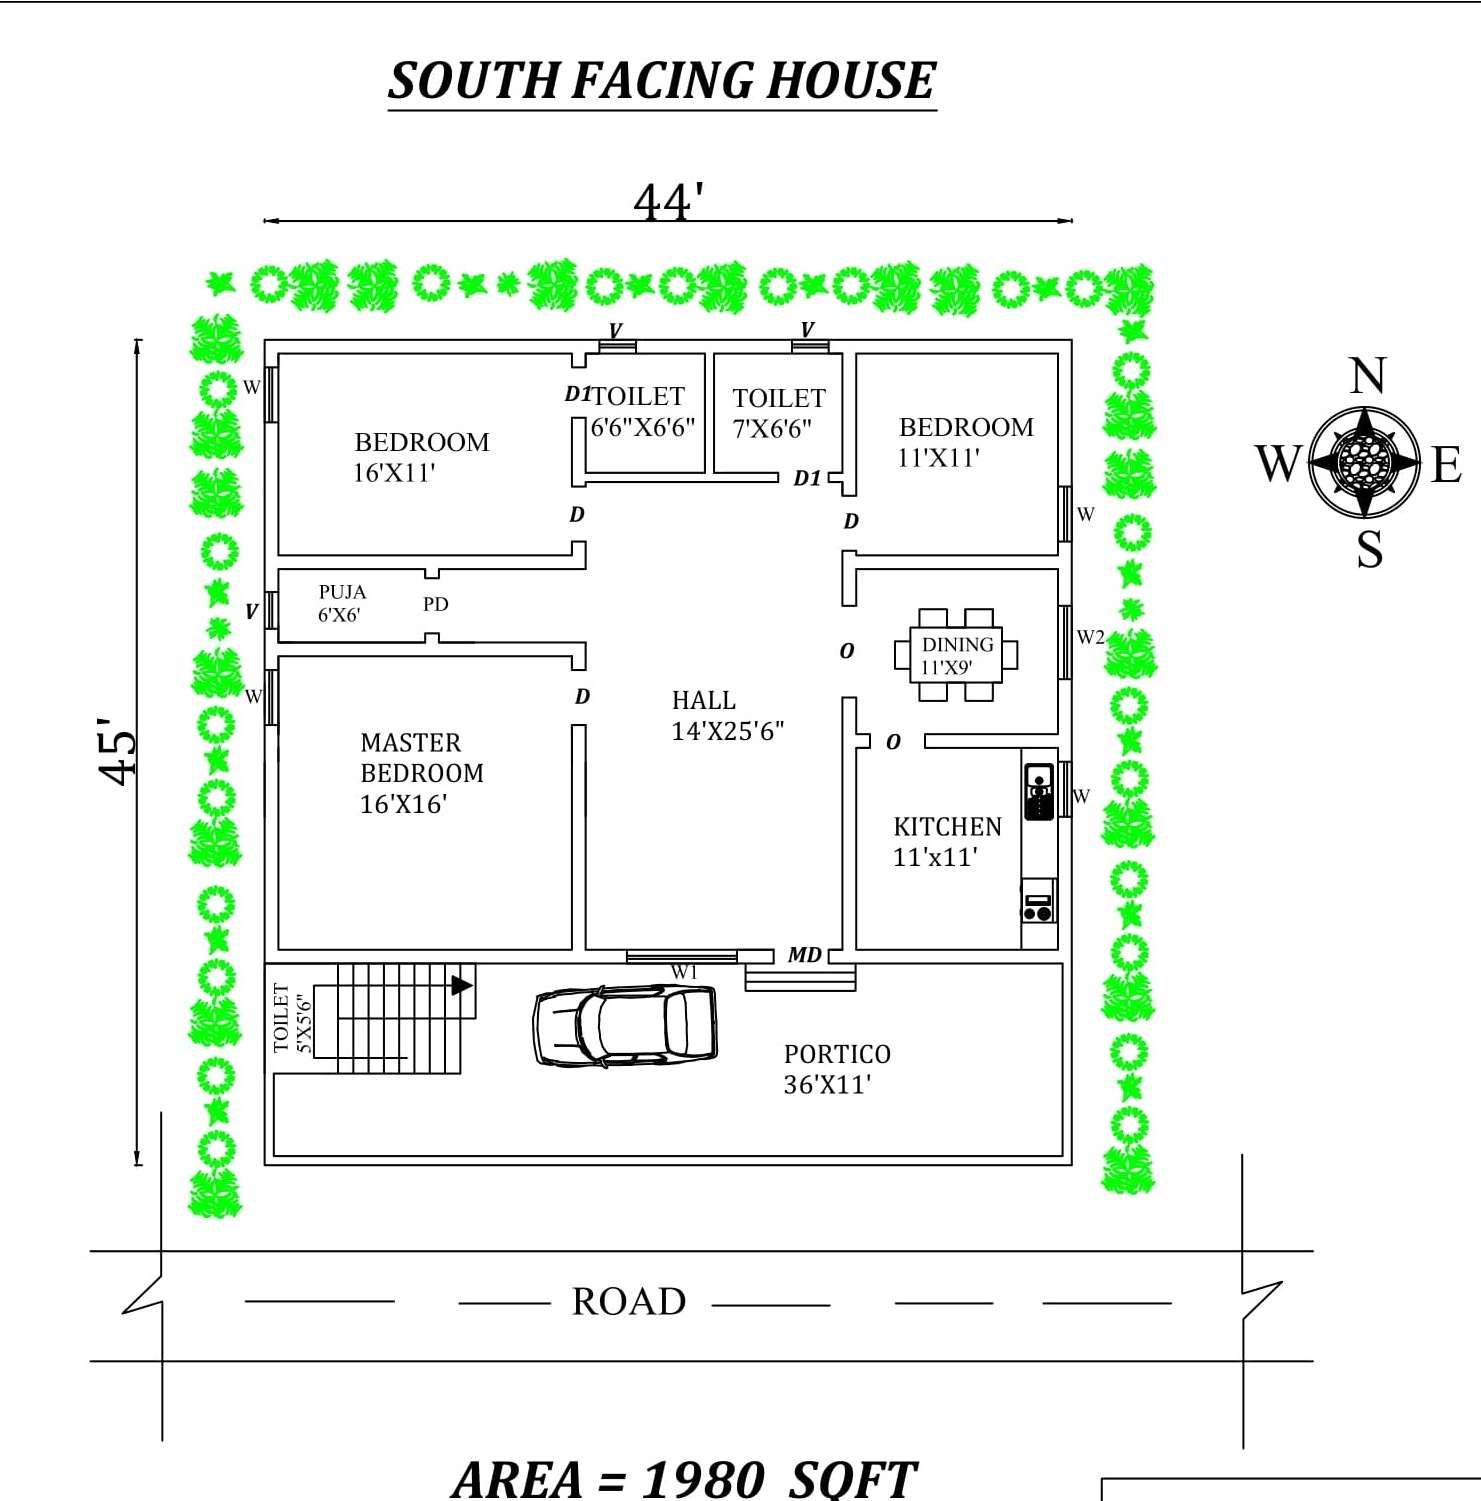 X Bhk South Facing House Plan As Per Vastu Shastraautocad Dwg Images And Photos Finder